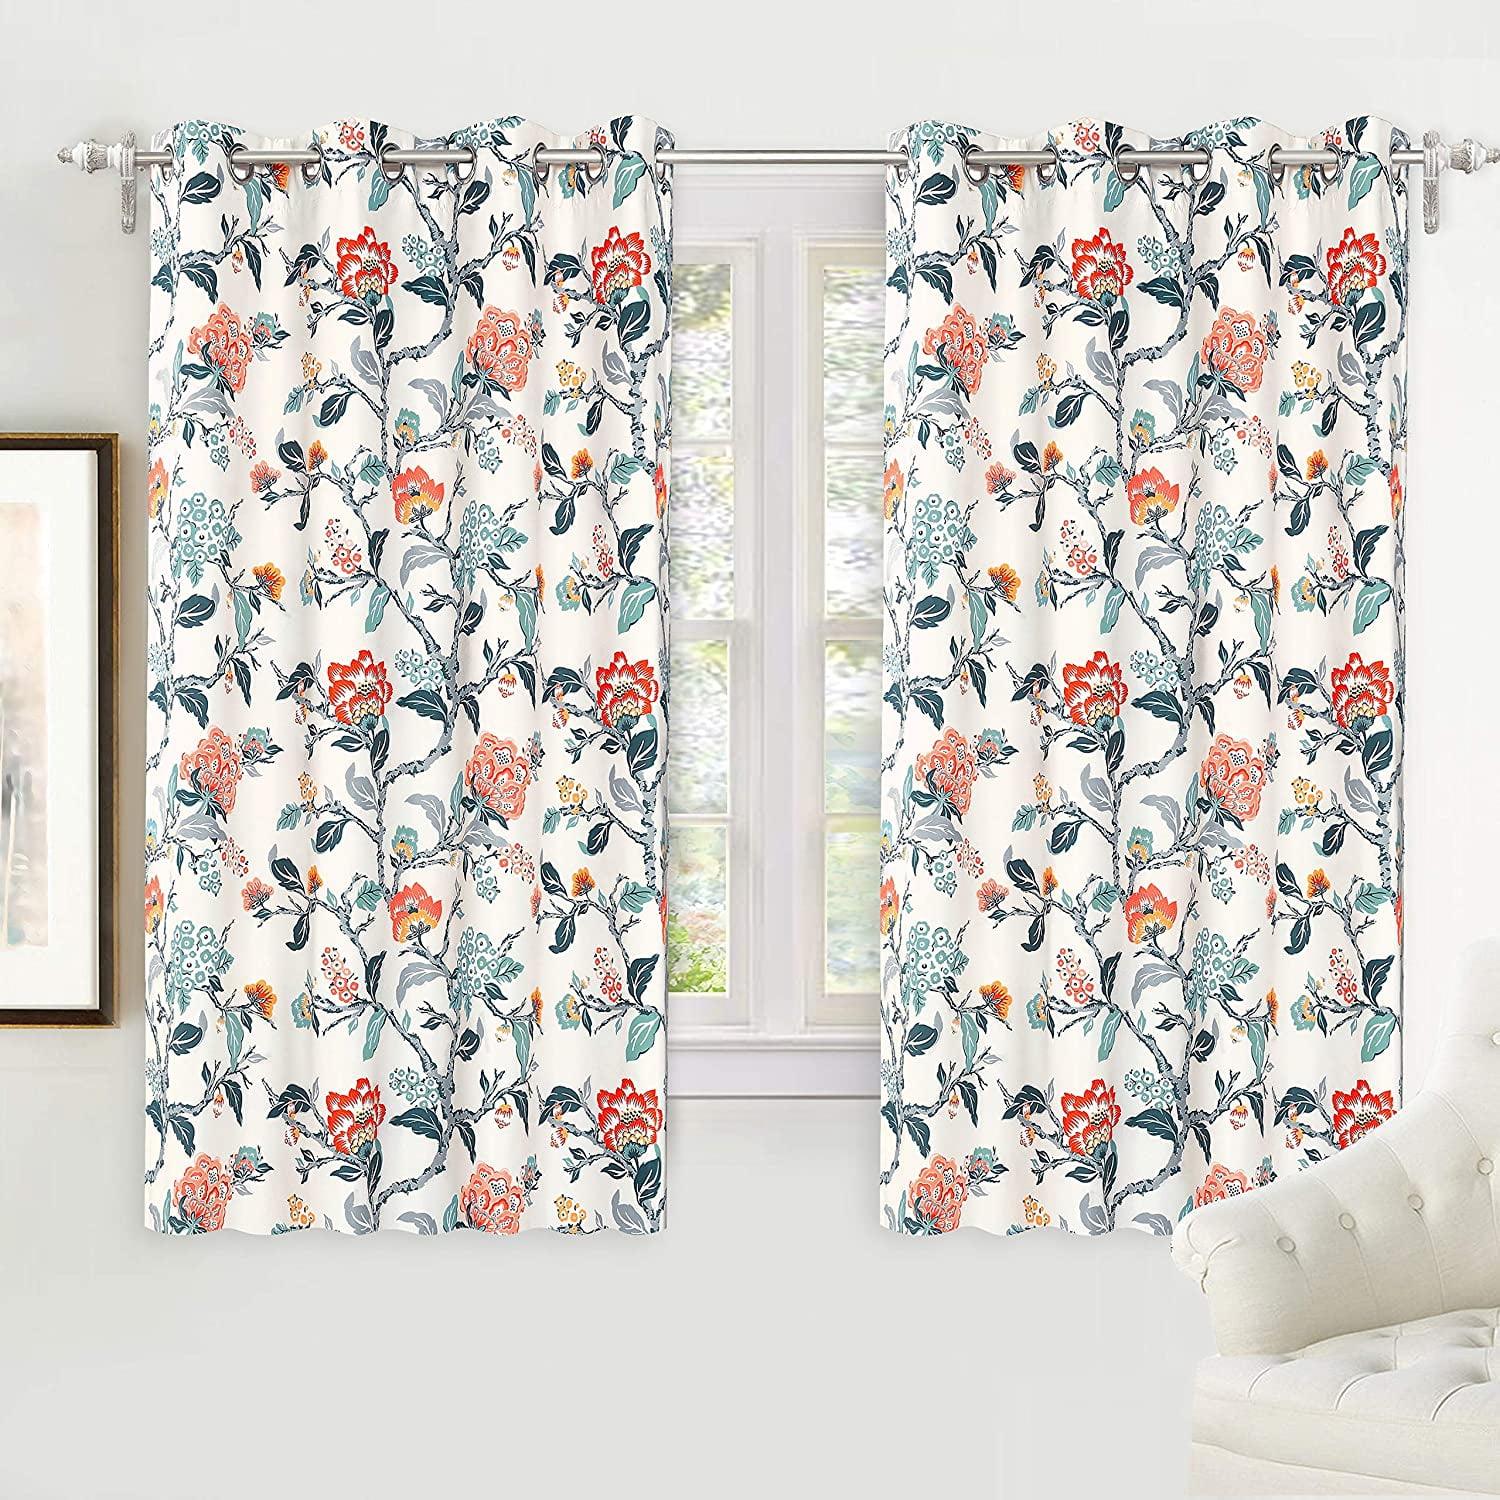 1PC PANEL SOPHISTICATED FLORAL PRINTED WINDOW CUTAIN INSULATED LINED BLACKOUT 